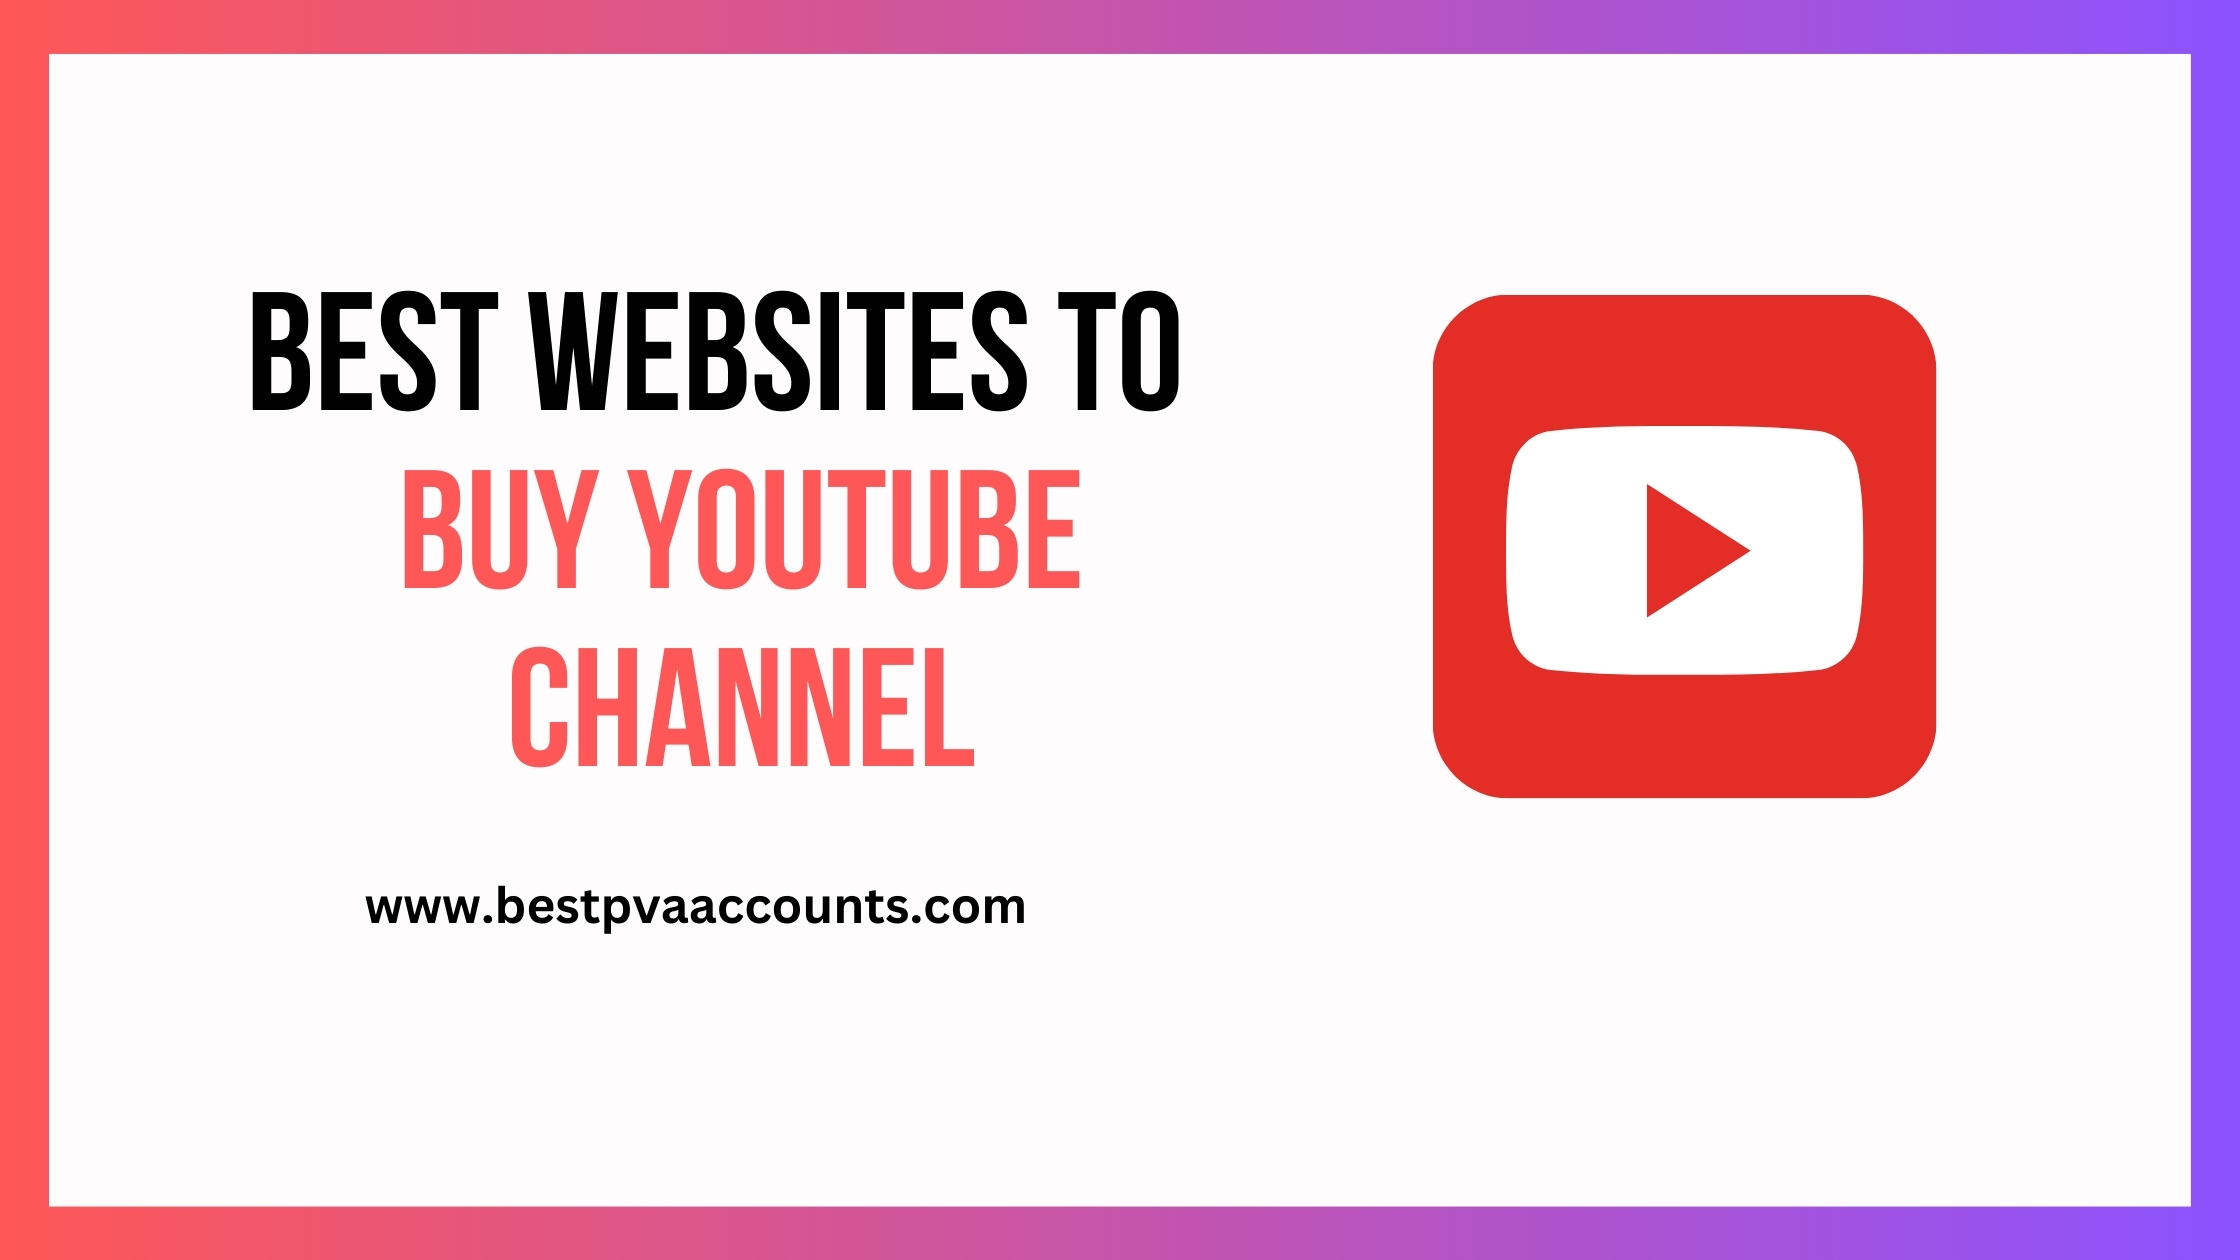 Best Sites To Buy Youtube Channel